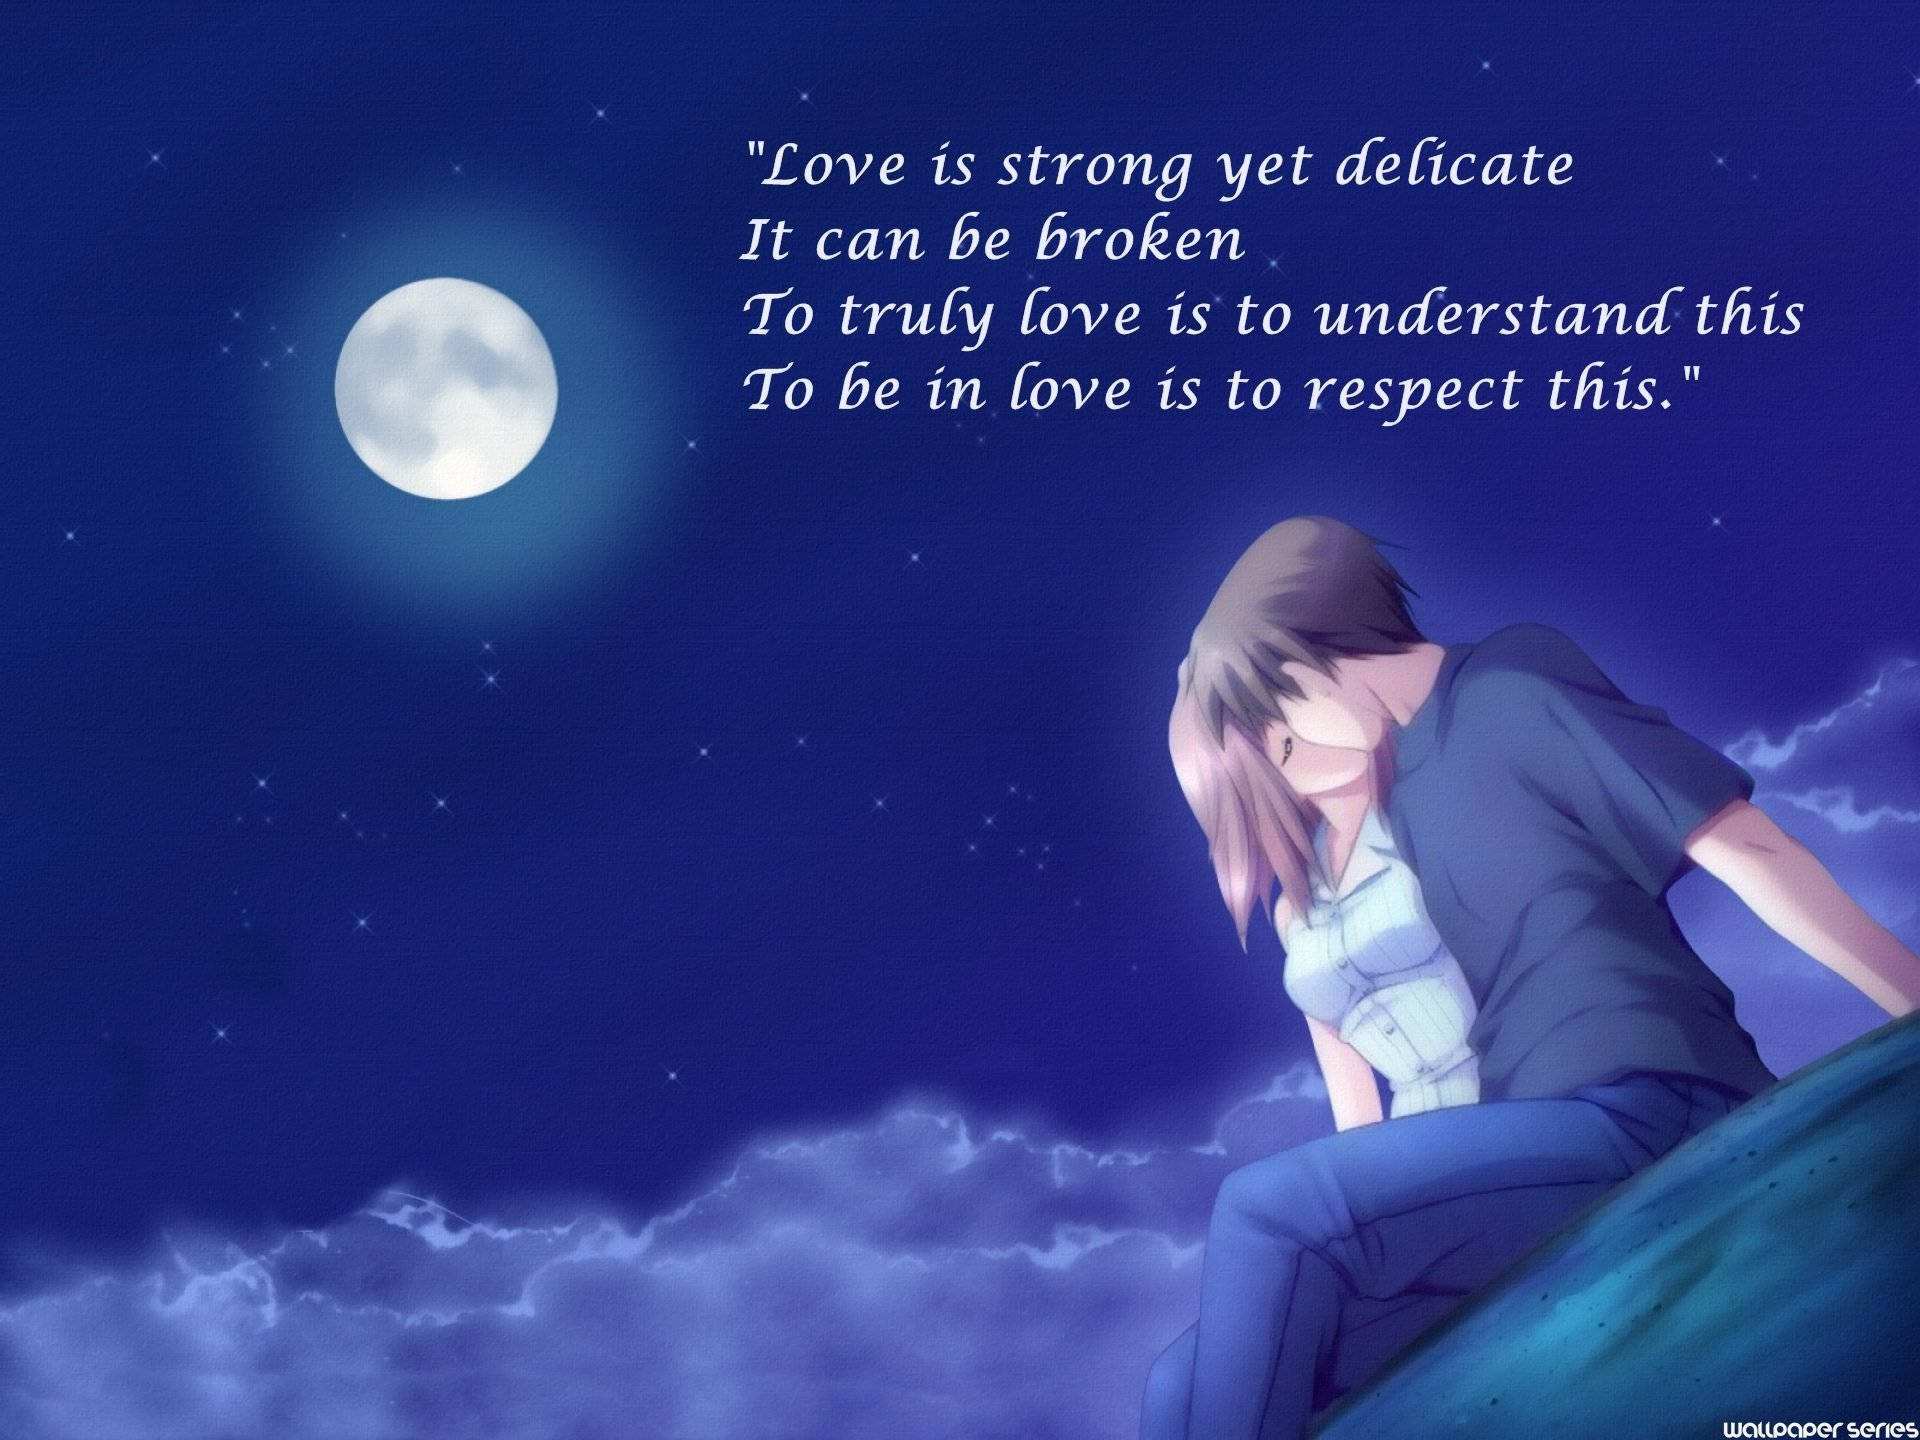 Free Love Quotes Wallpaper Downloads, [200+] Love Quotes Wallpapers for  FREE 